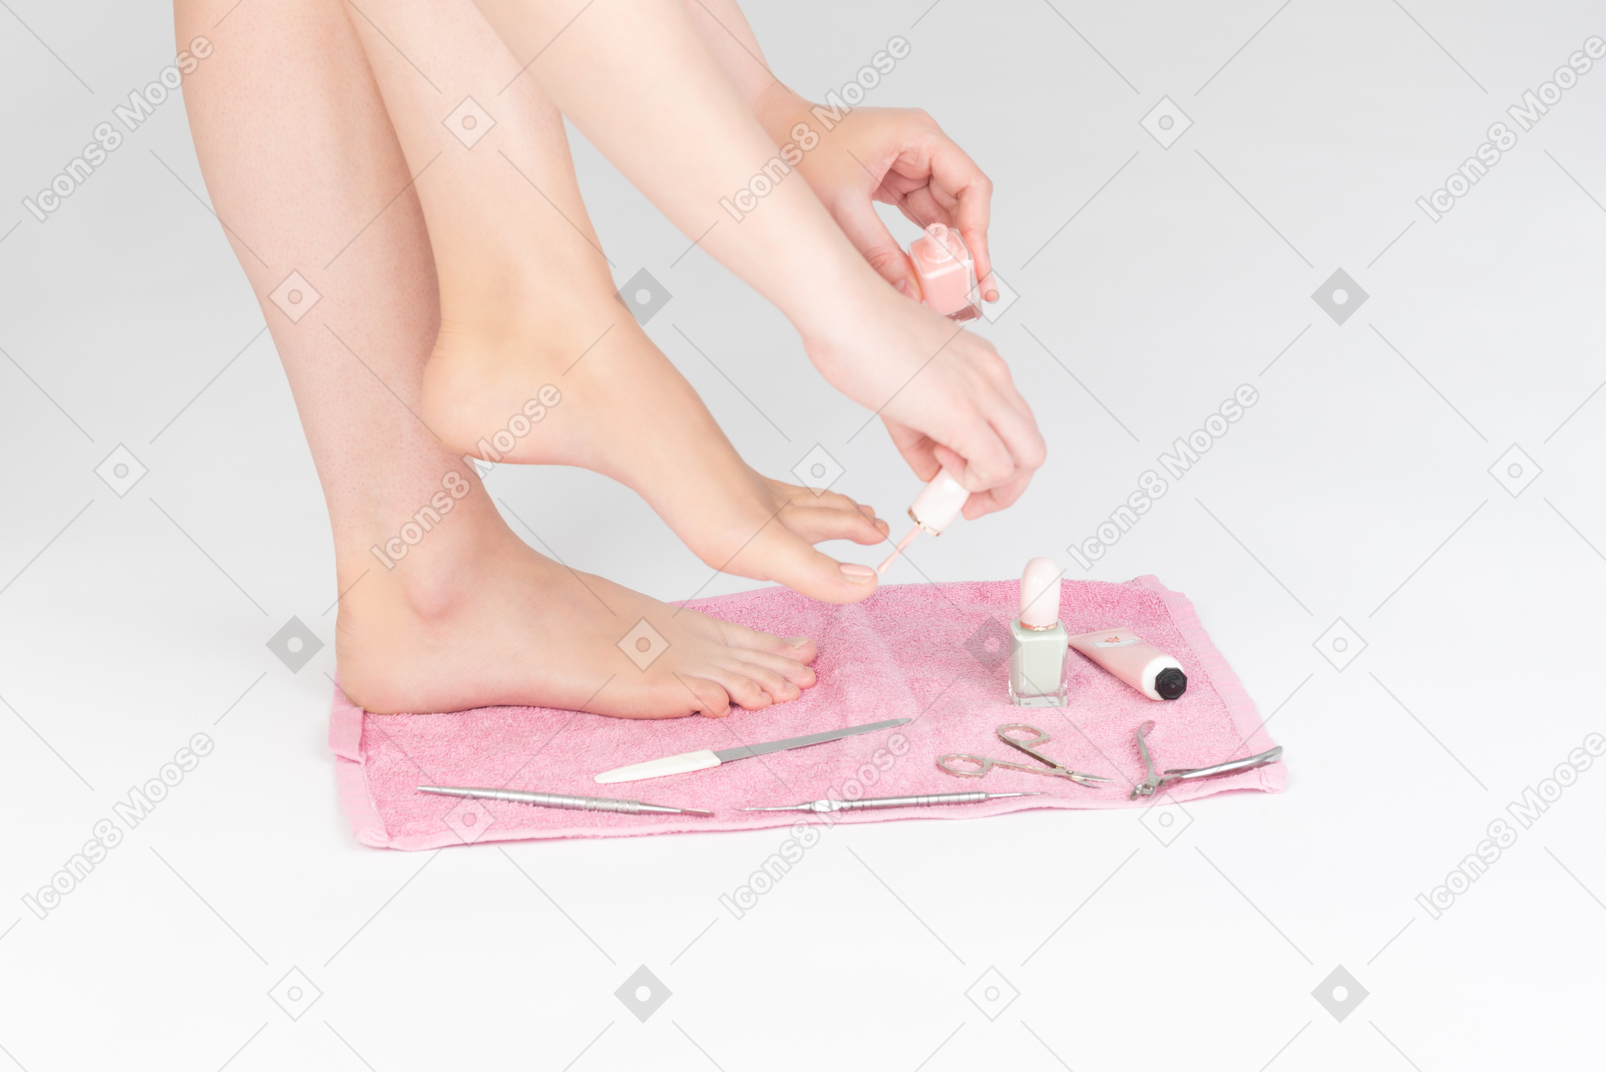 Shot of female legs and manicure tools near it